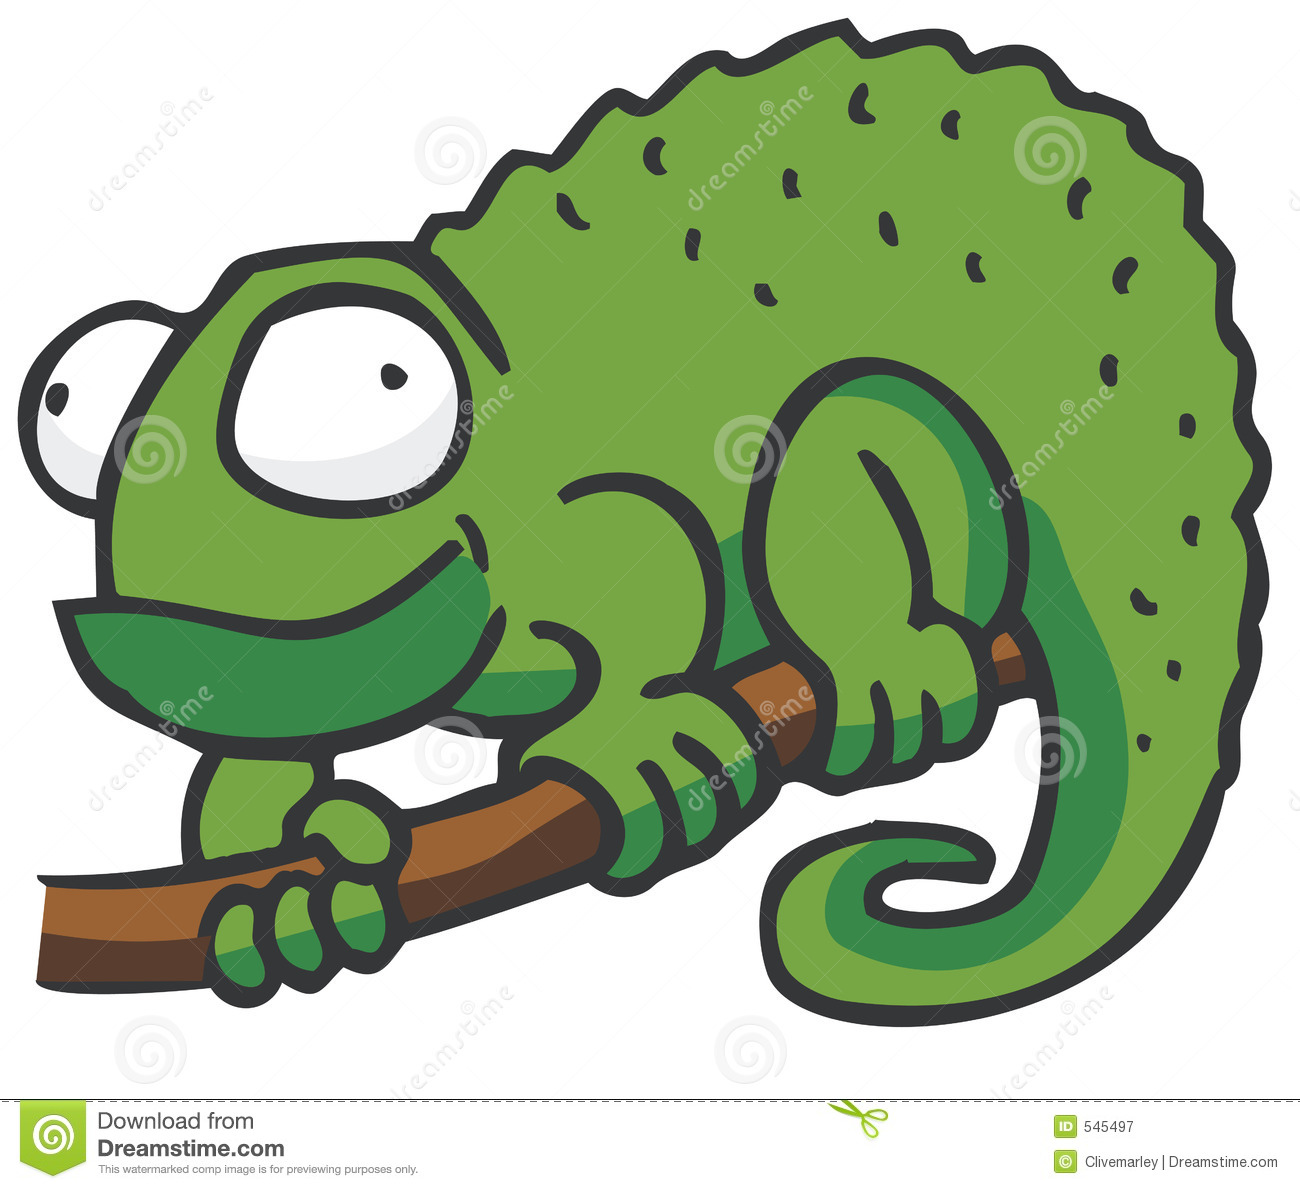 Jackson's Chameleon clipart #17, Download drawings